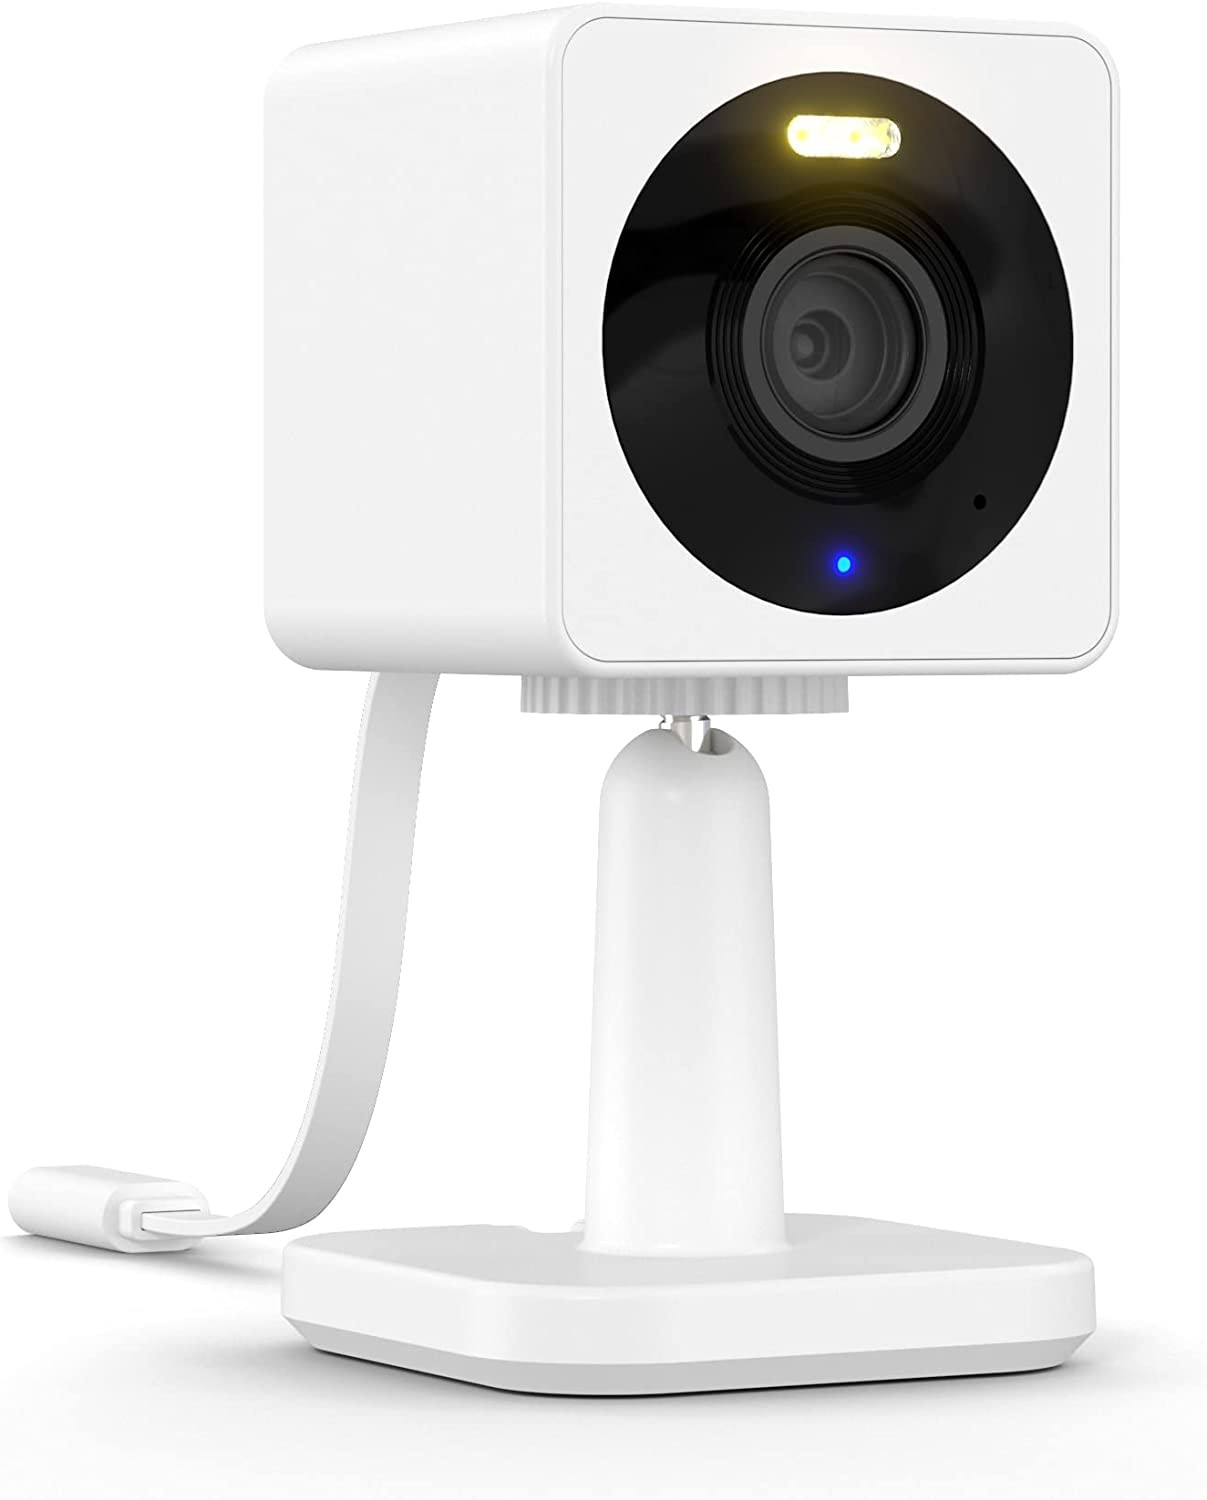 WYZE Cam OG 1080p HD Wi-Fi Security Camera - Indoor/Outdoor, Color Night Vision, Spotlight, 2-Way Audio, Cloud & Local storage- Ideal for Home Security, Baby, Pet Monitoring - Alexa & Google Assistant